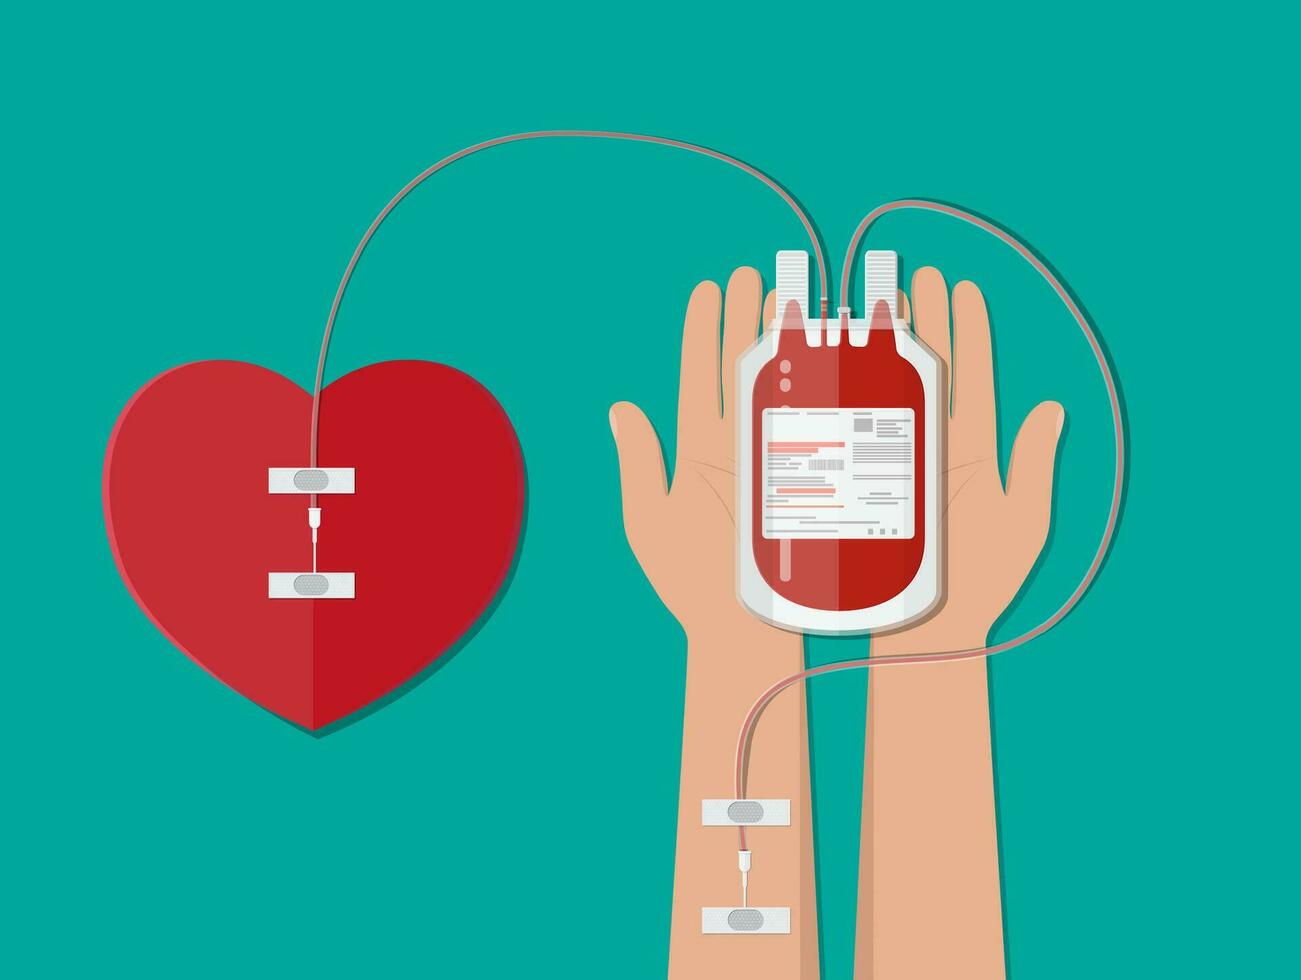 Blood bag and hand of donor with heart. Blood donation day concept. Human donates blood. Vector illustration in flat style.